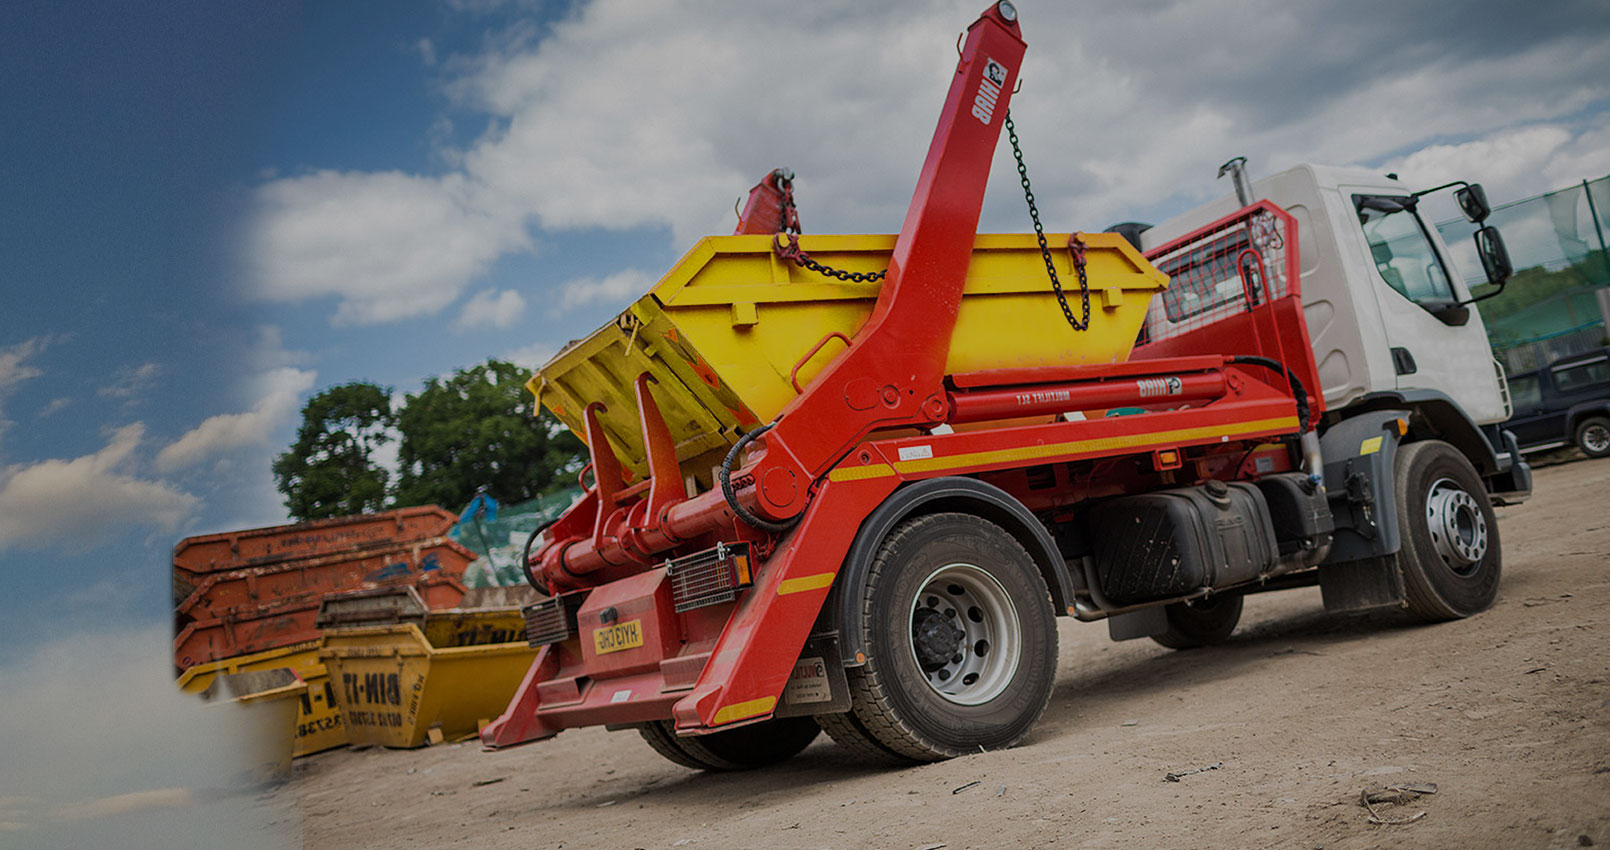 Providing The Finest Skip Hire Services To The People